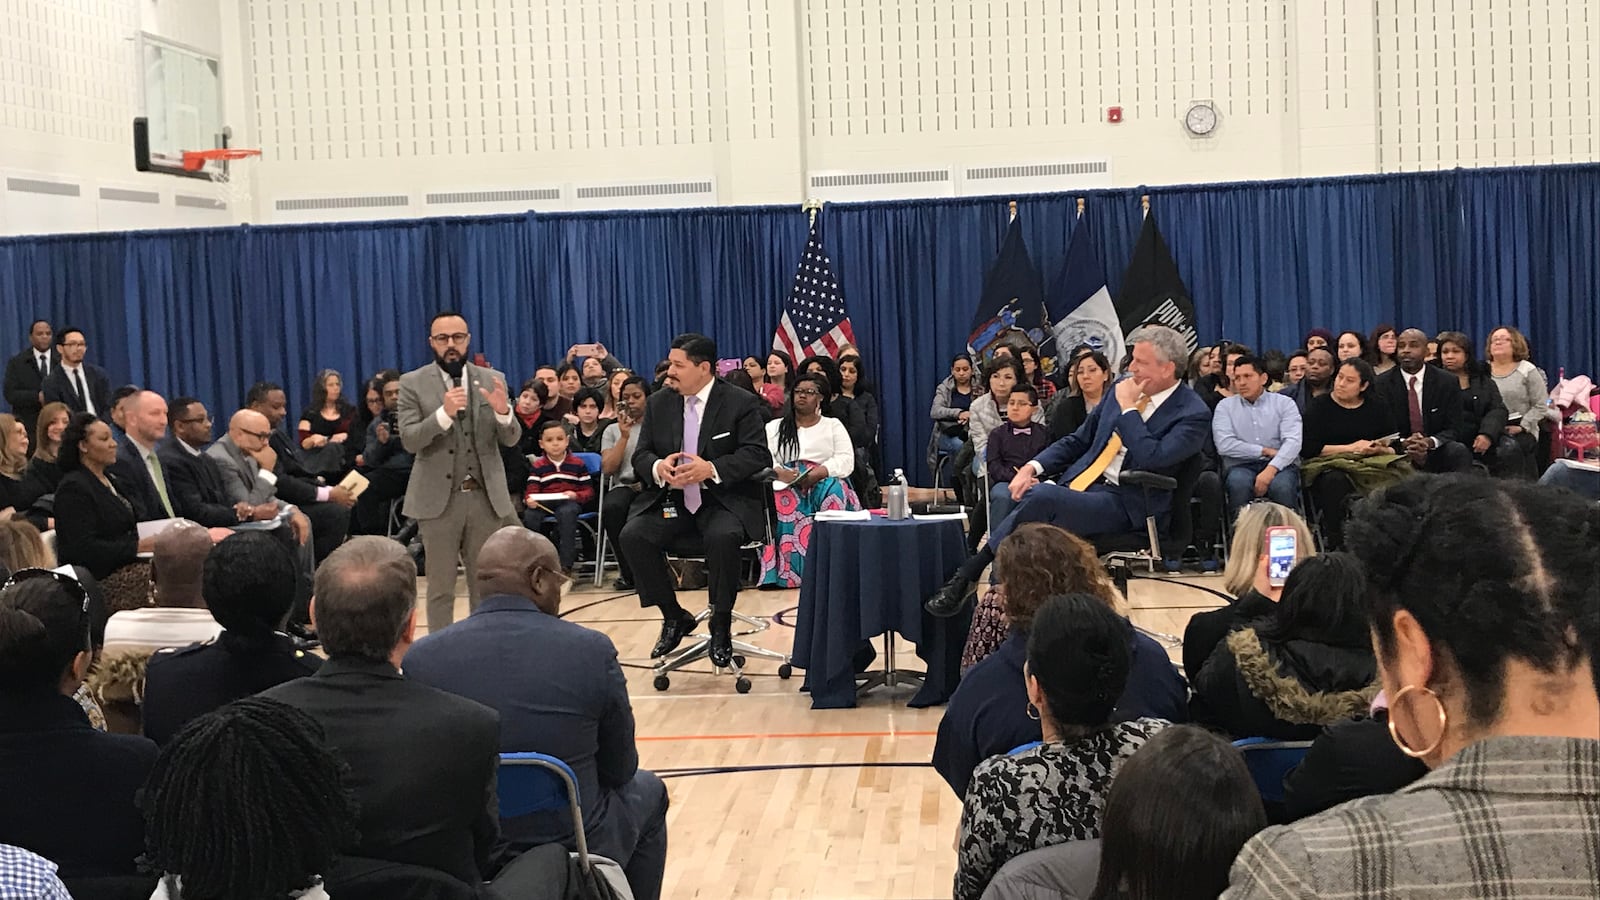 Mayor Bill de Blasio and schools Chancellor Richard Carranza host a forum for parents in Queens, the first of five stops across the city.